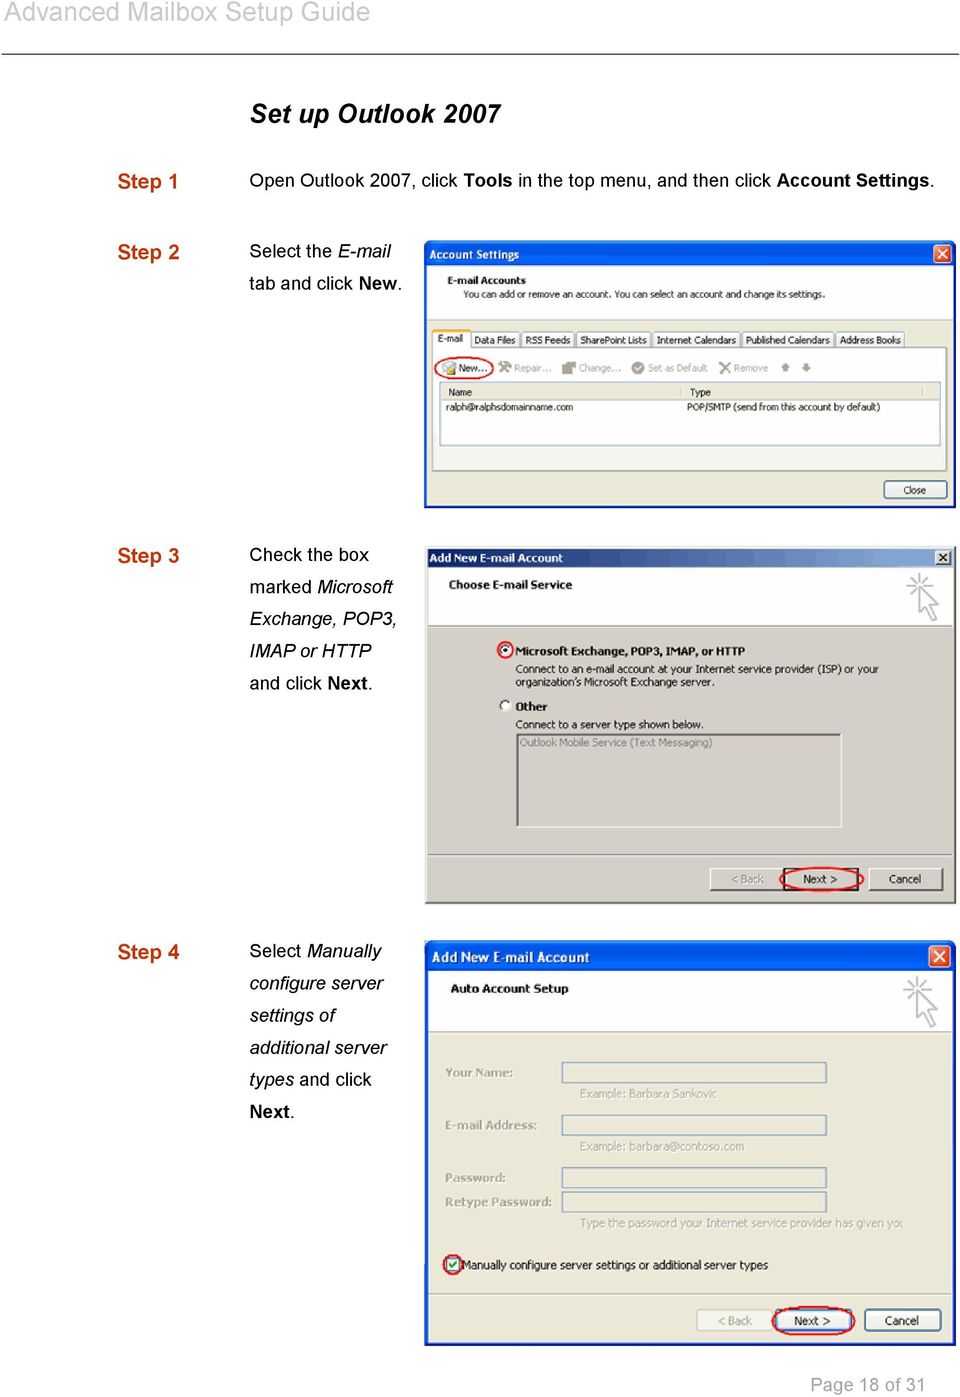 Step 3 Check the box marked Microsoft Exchange, POP3, IMAP or HTTP and click Next.